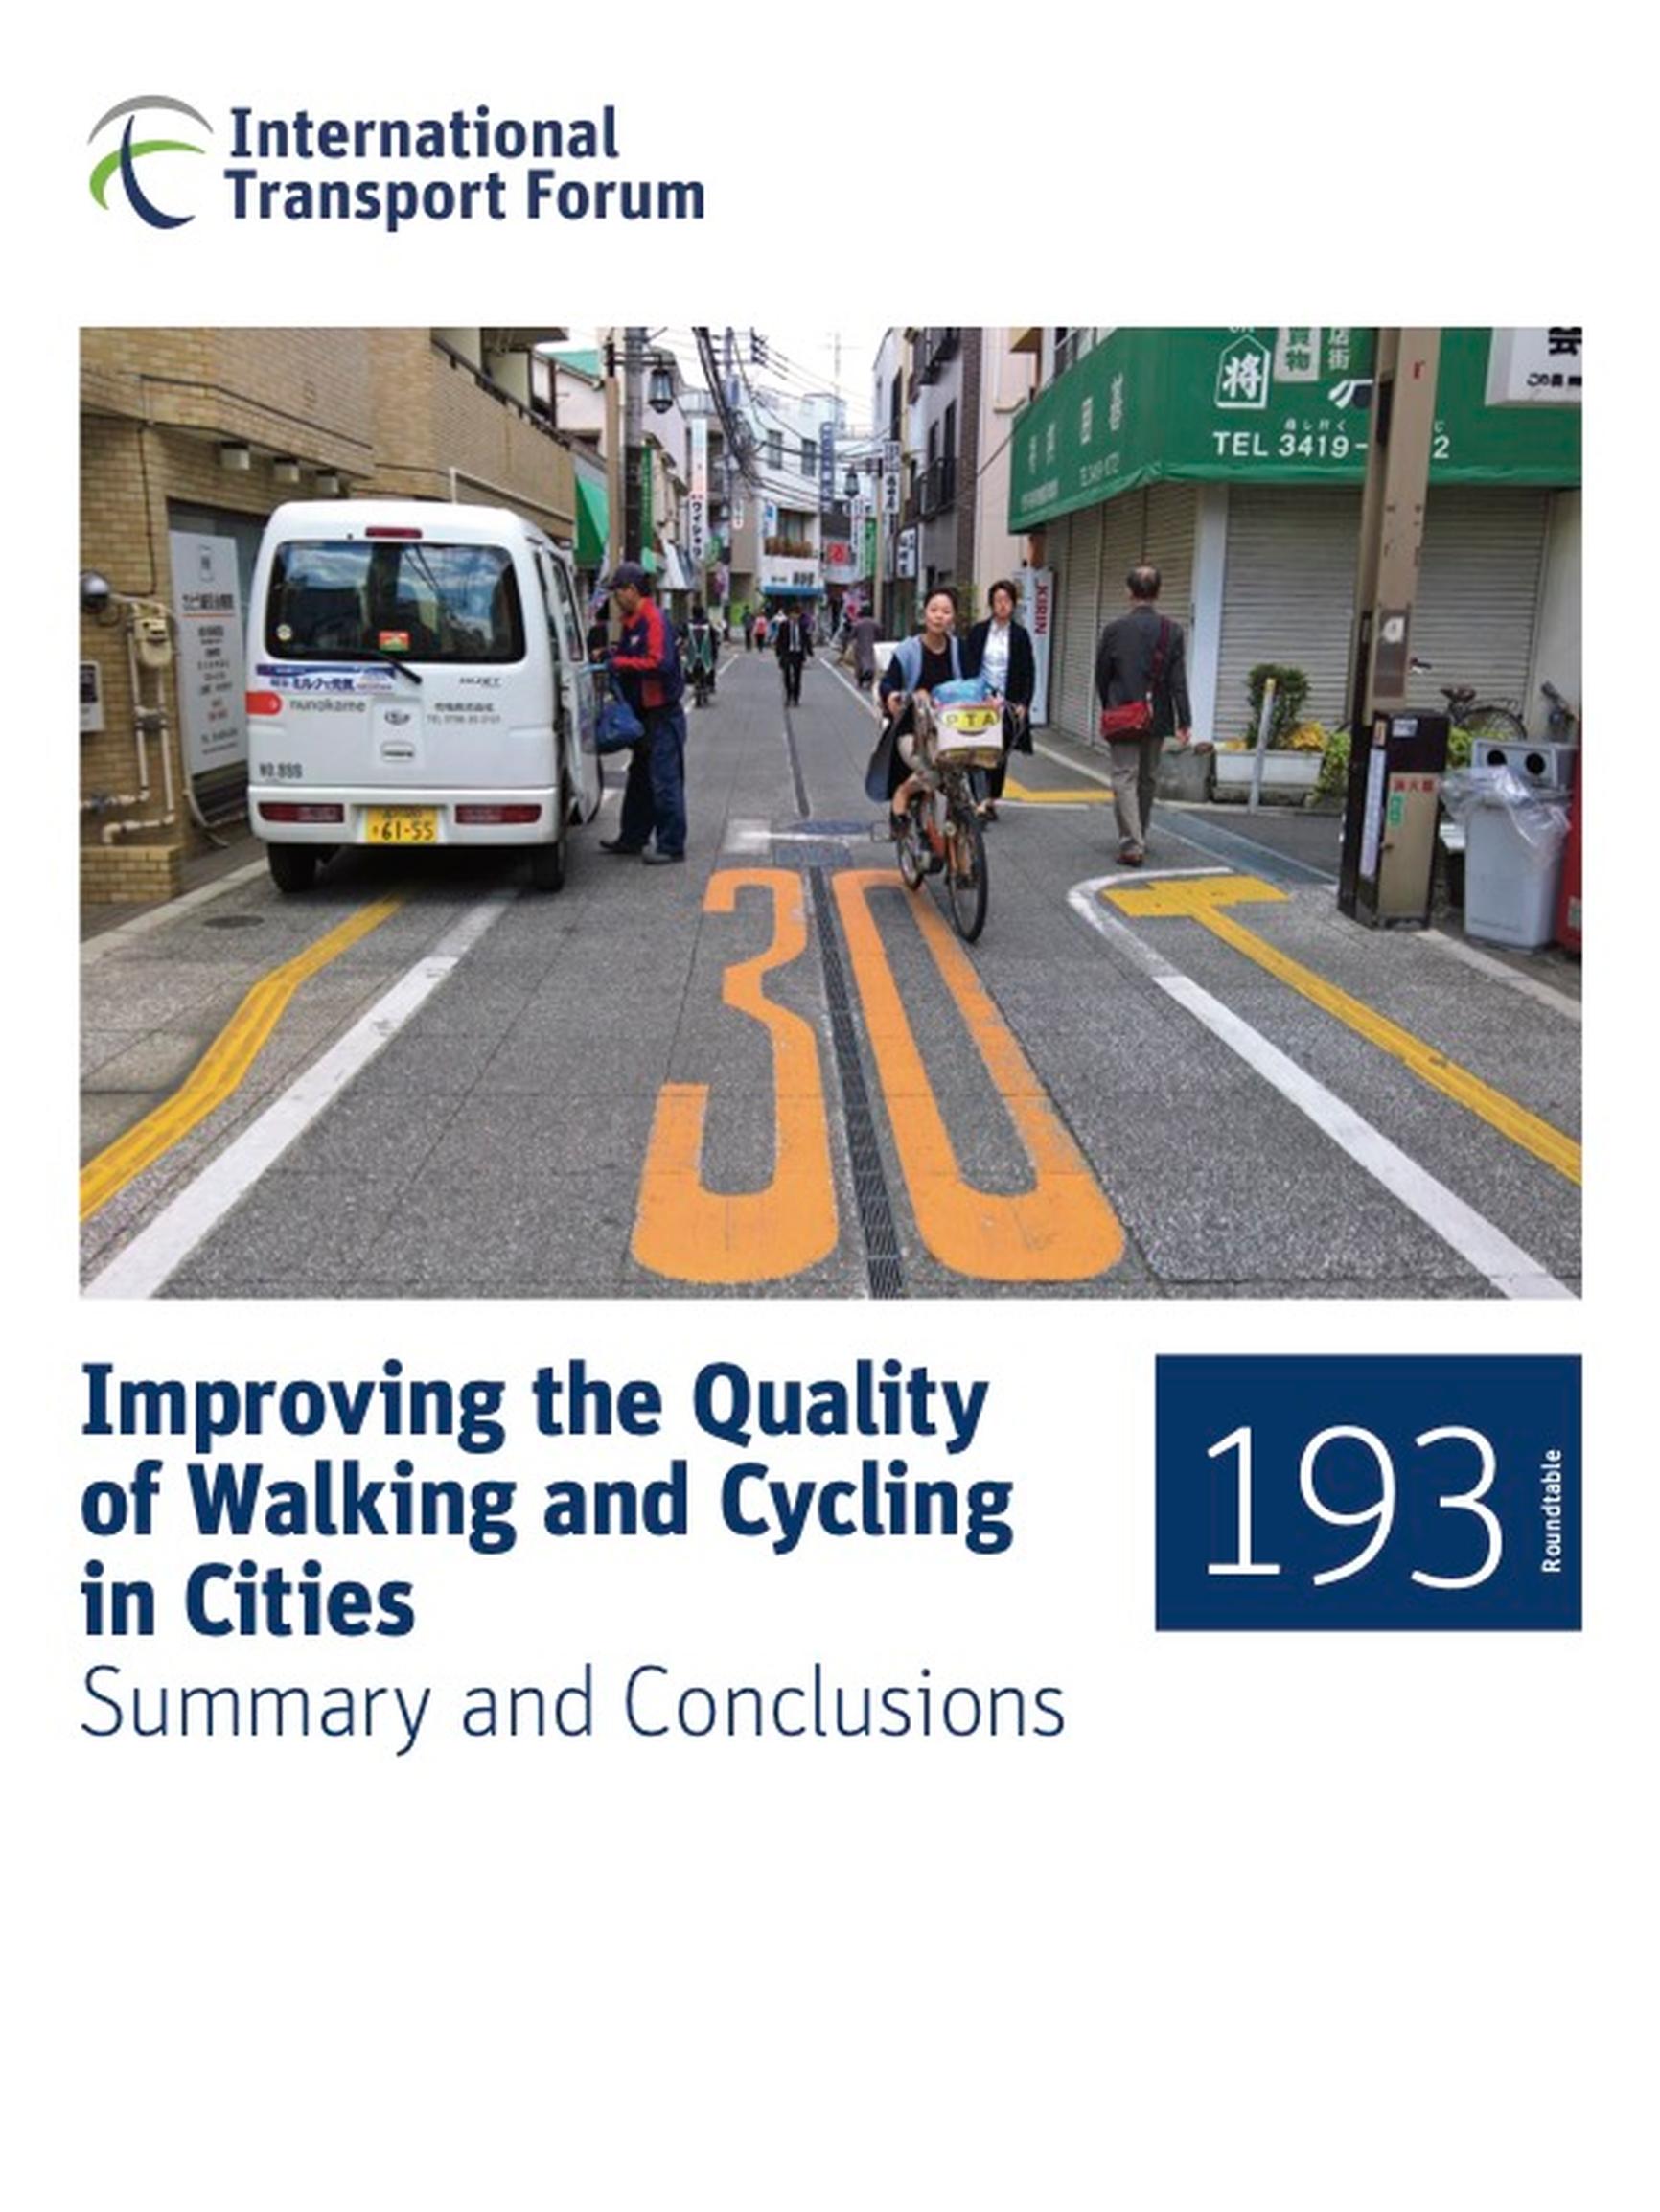 Ending car-centric thinking key to boosting walking and cycling, says ITF report